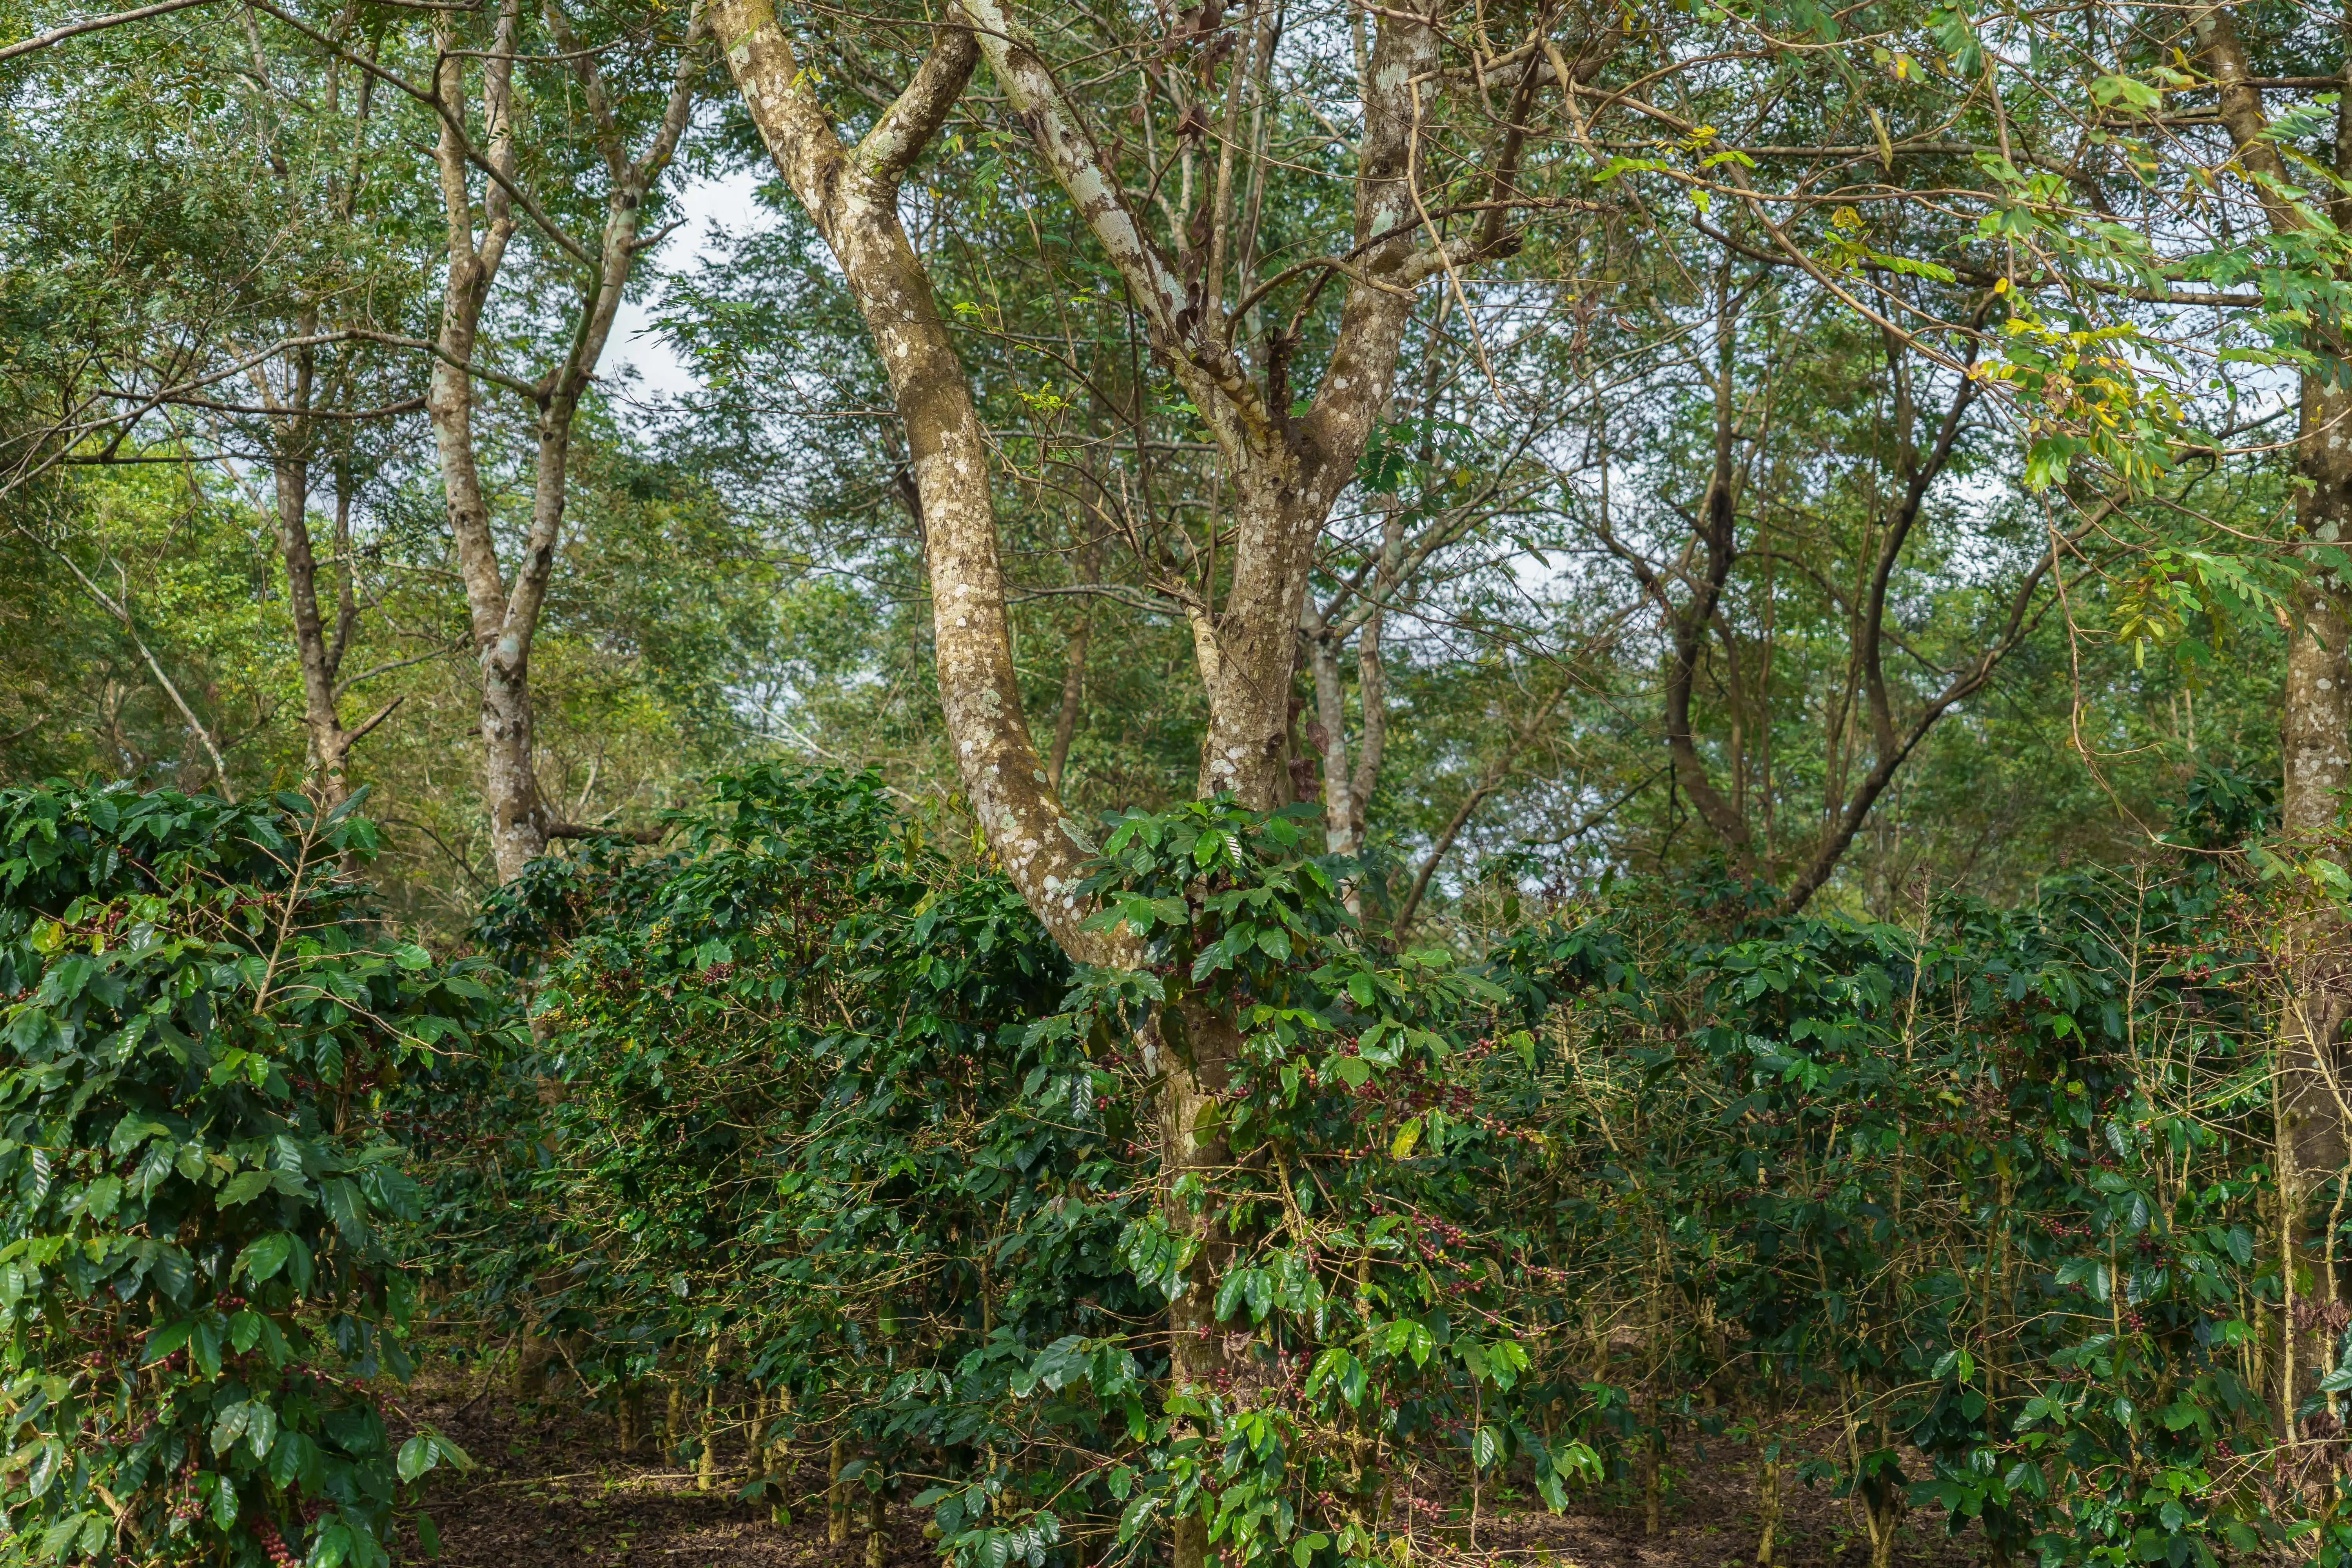 Slow ensures high-quality coffee by nurturing coffee growth in forest-friendly environments, prioritizing sustainability and forest protection